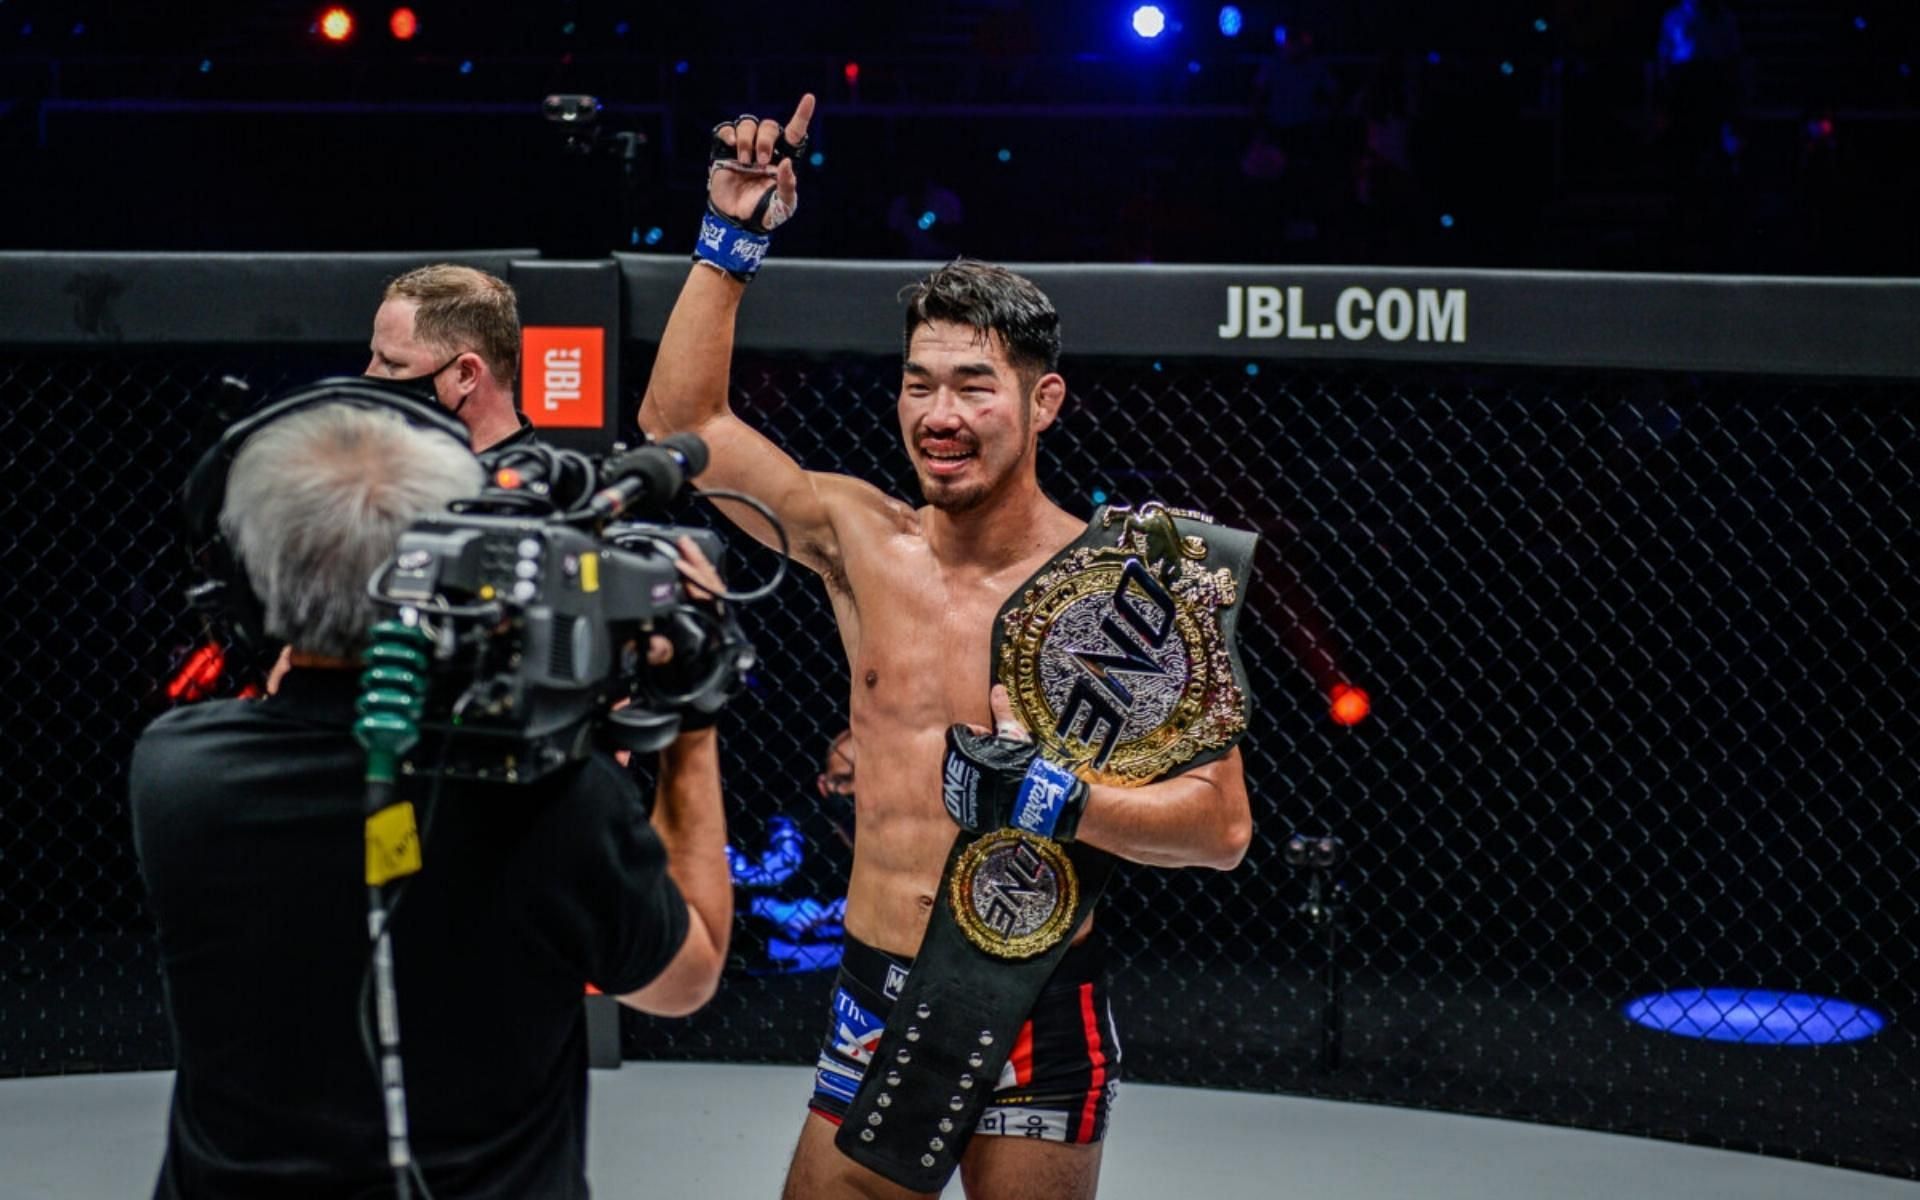 ONE Championship lightweight world champion Ok Rae Yoon made the most of 2021, debuting in the promotion and winning the title in the same year. (Image courtesy of ONE Championship)